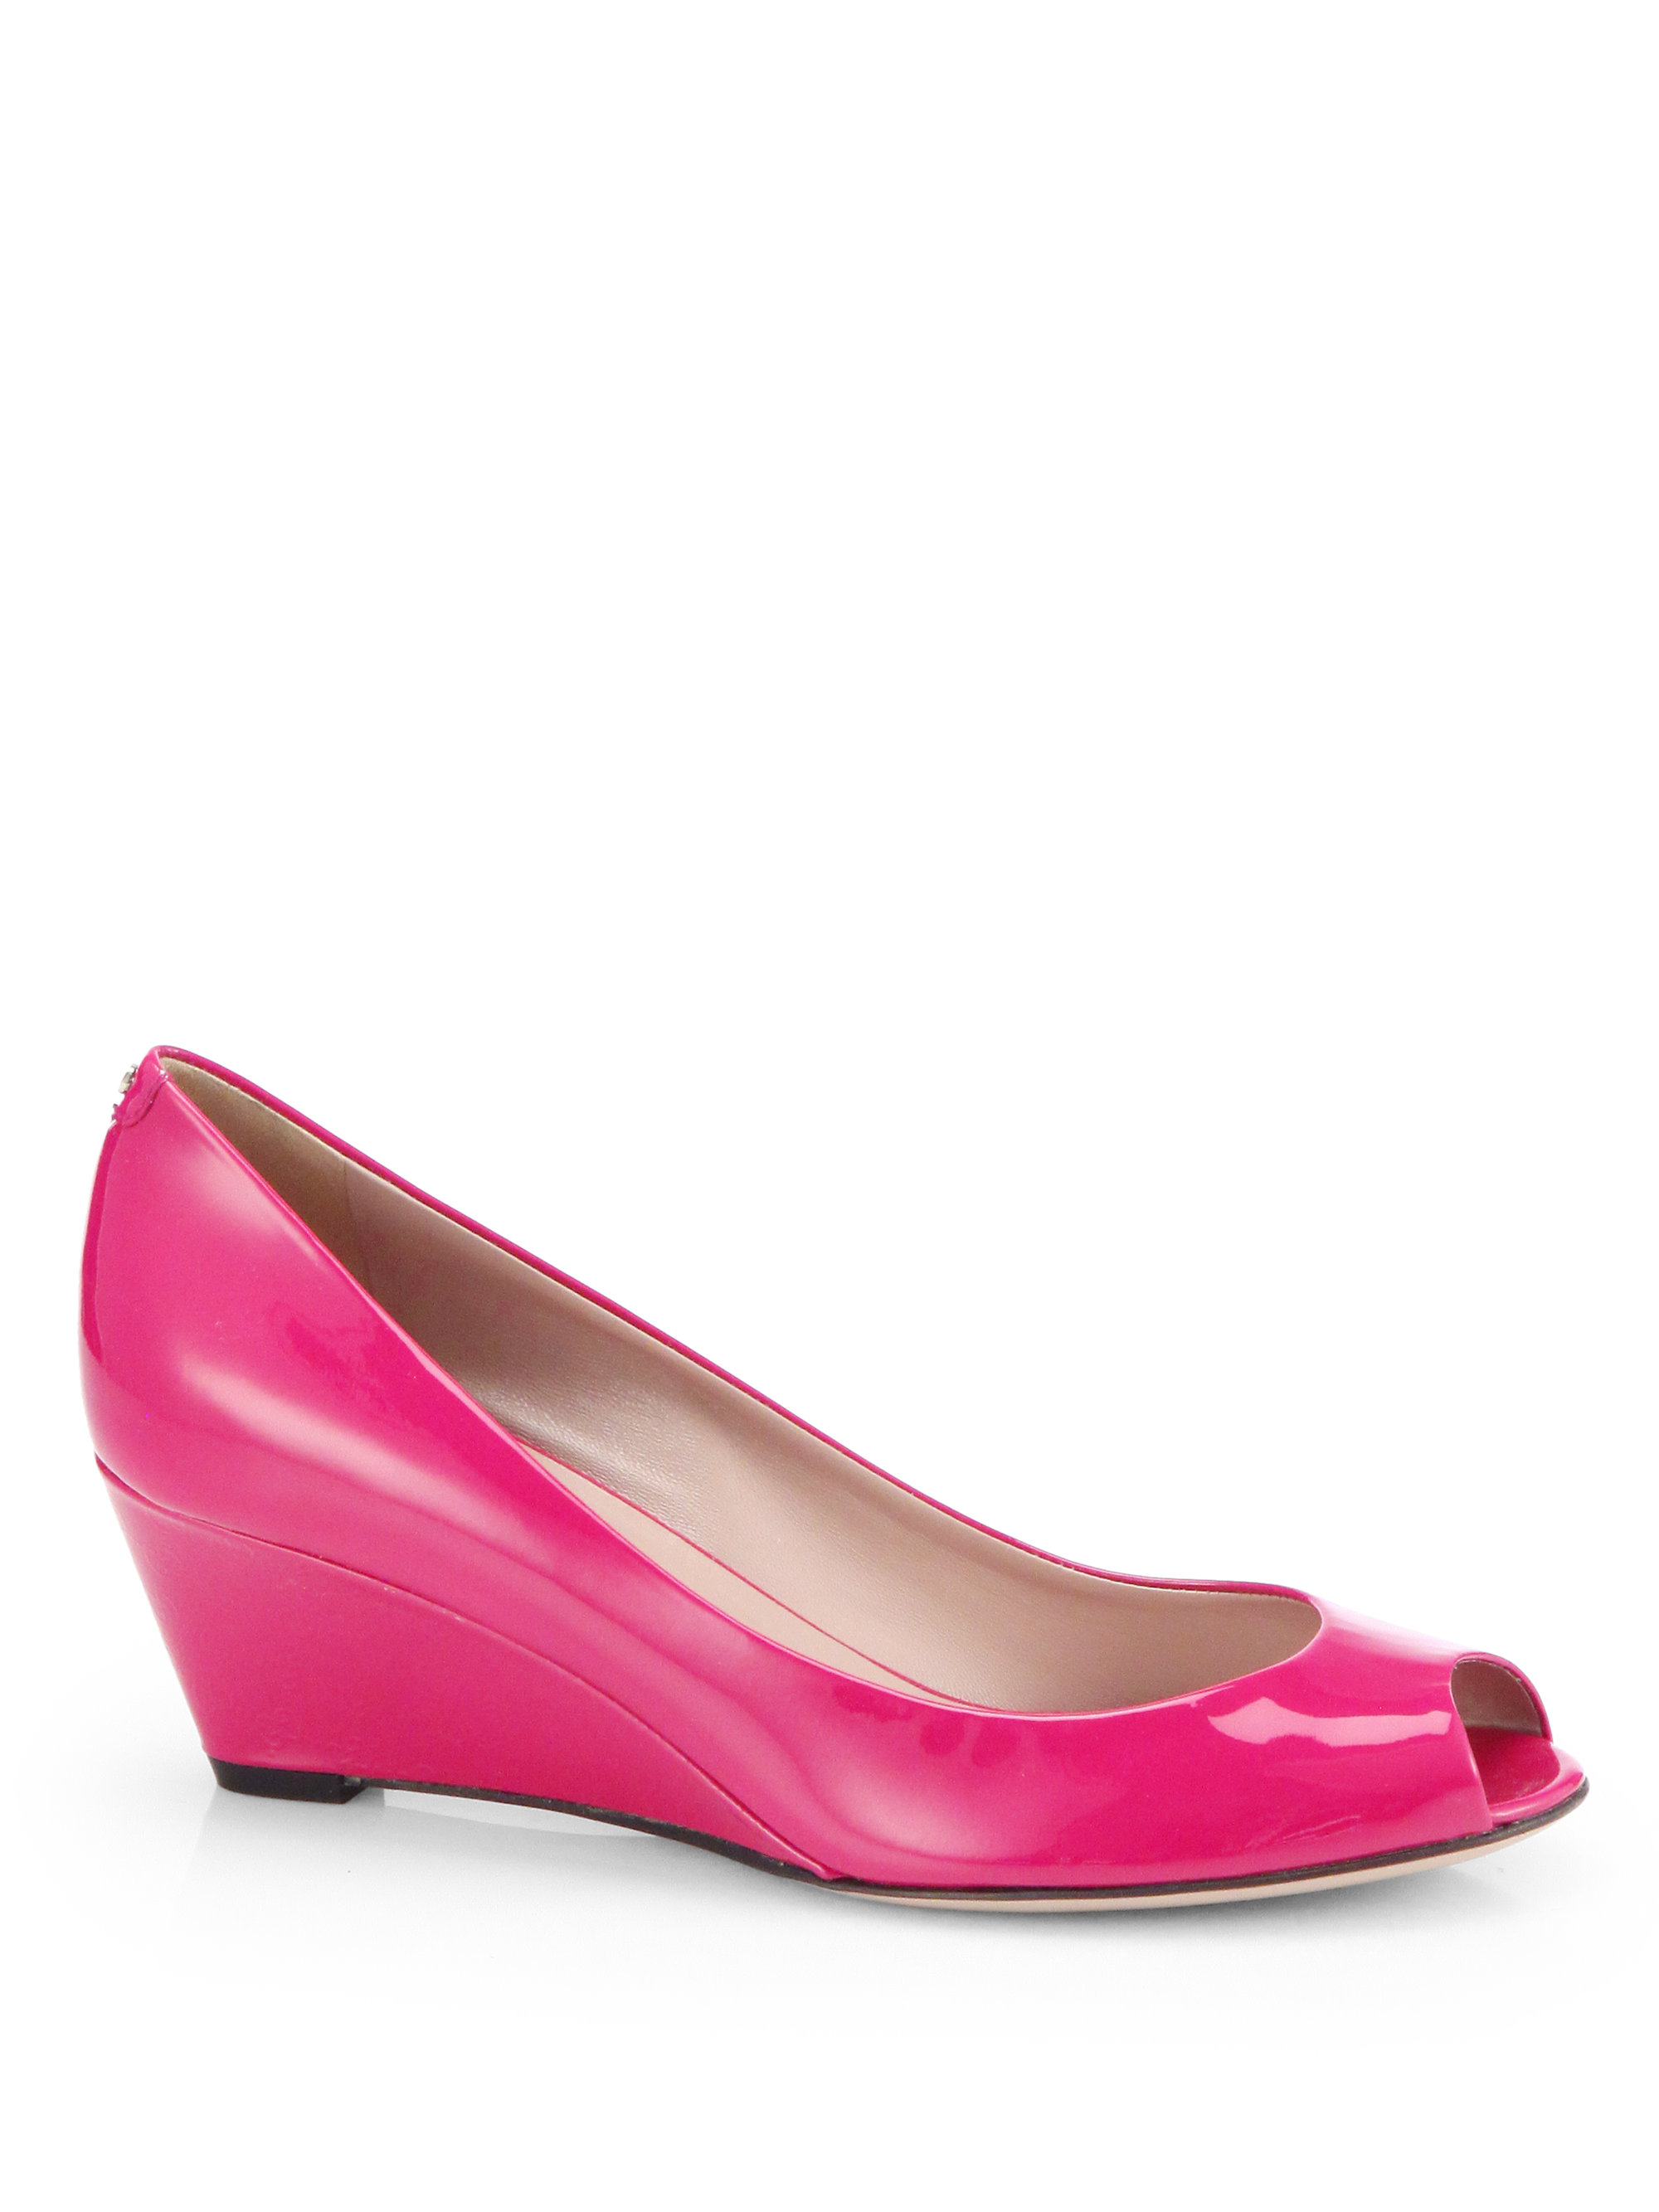 Gucci Charlene Patent Leather Wedge Pumps in Pink (BRIGHT PINK) | Lyst